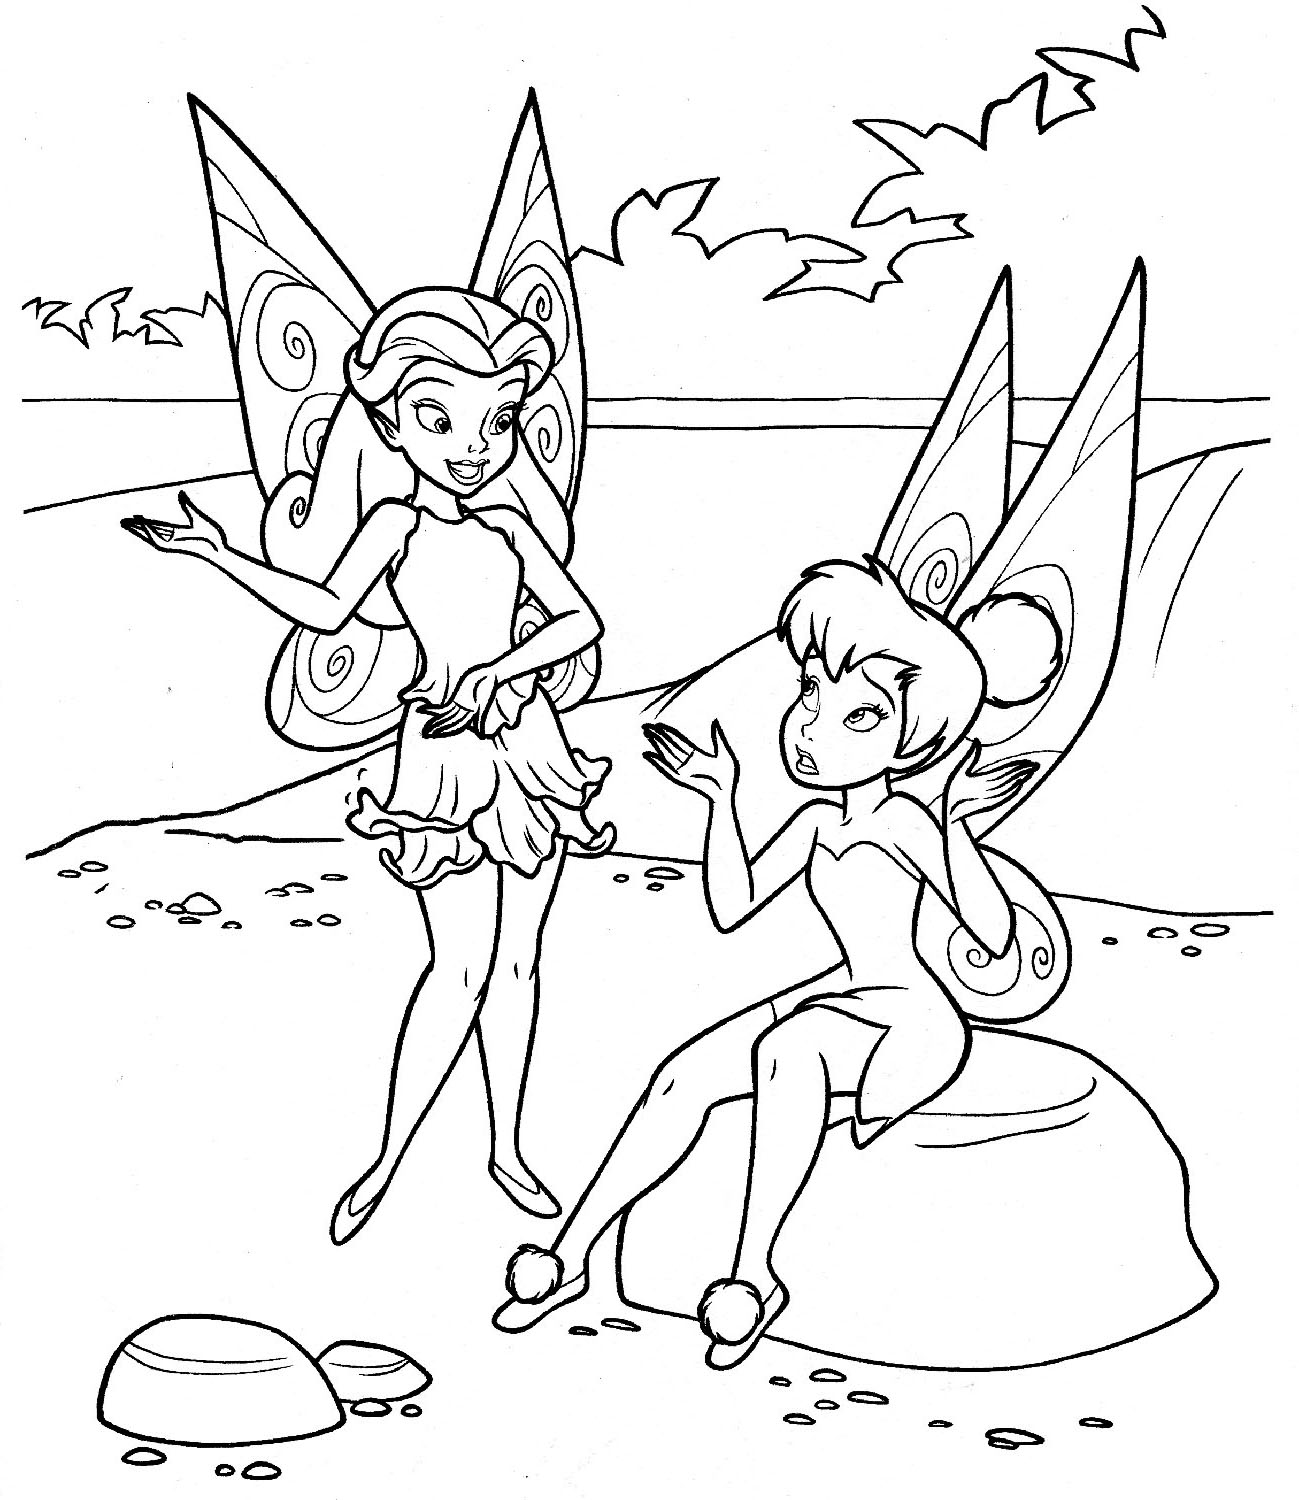 Tinker Bell coloring #18, Download drawings